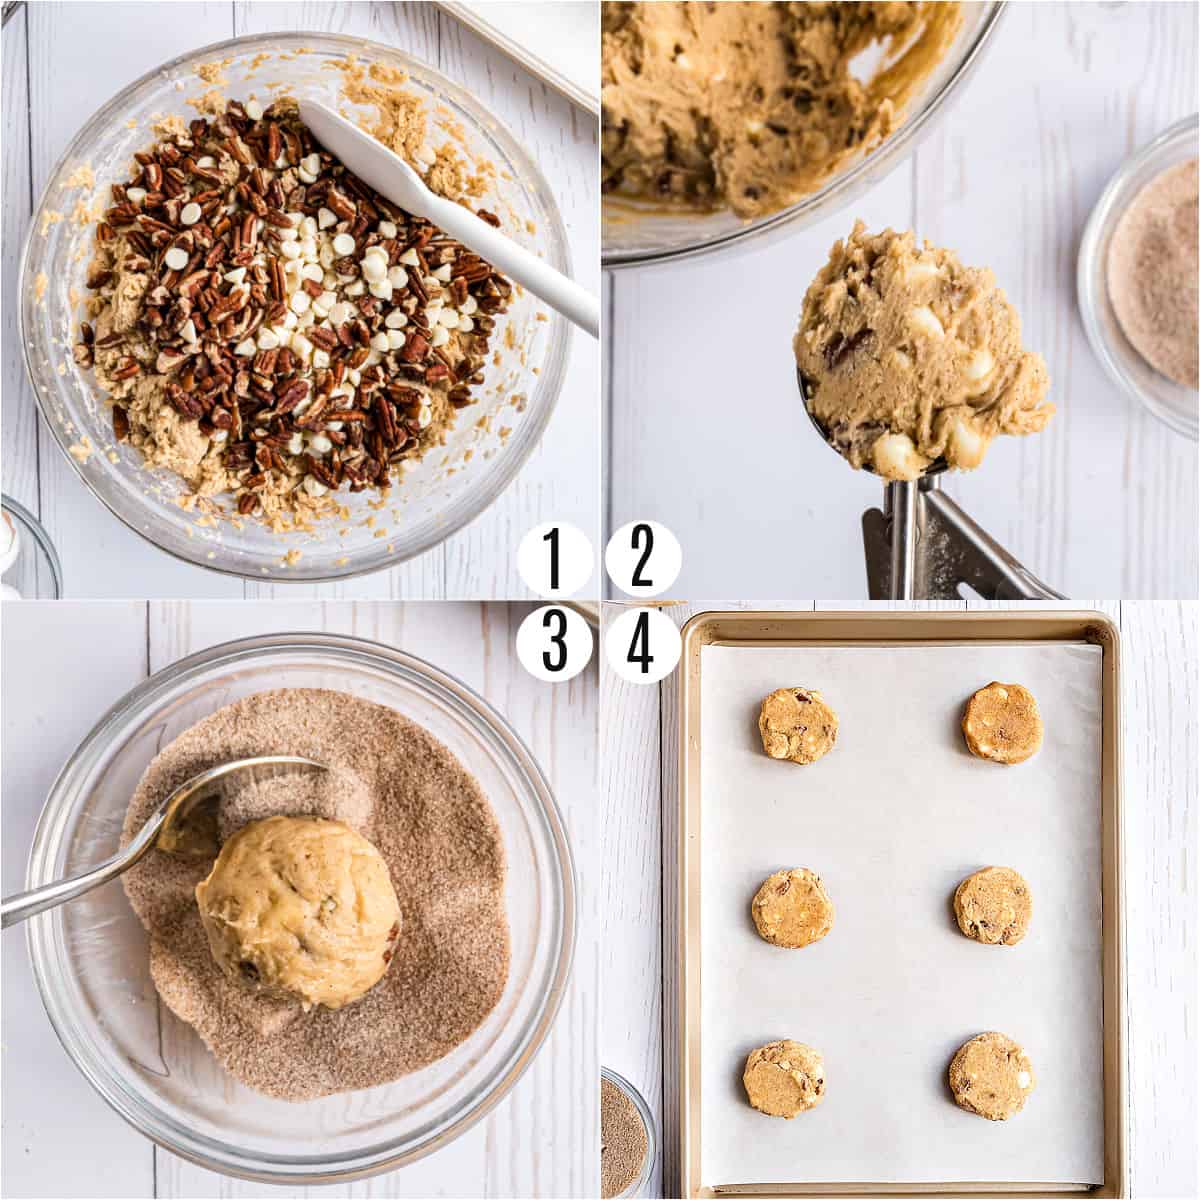 Step by step photos showing how to make cinnamon cookies.